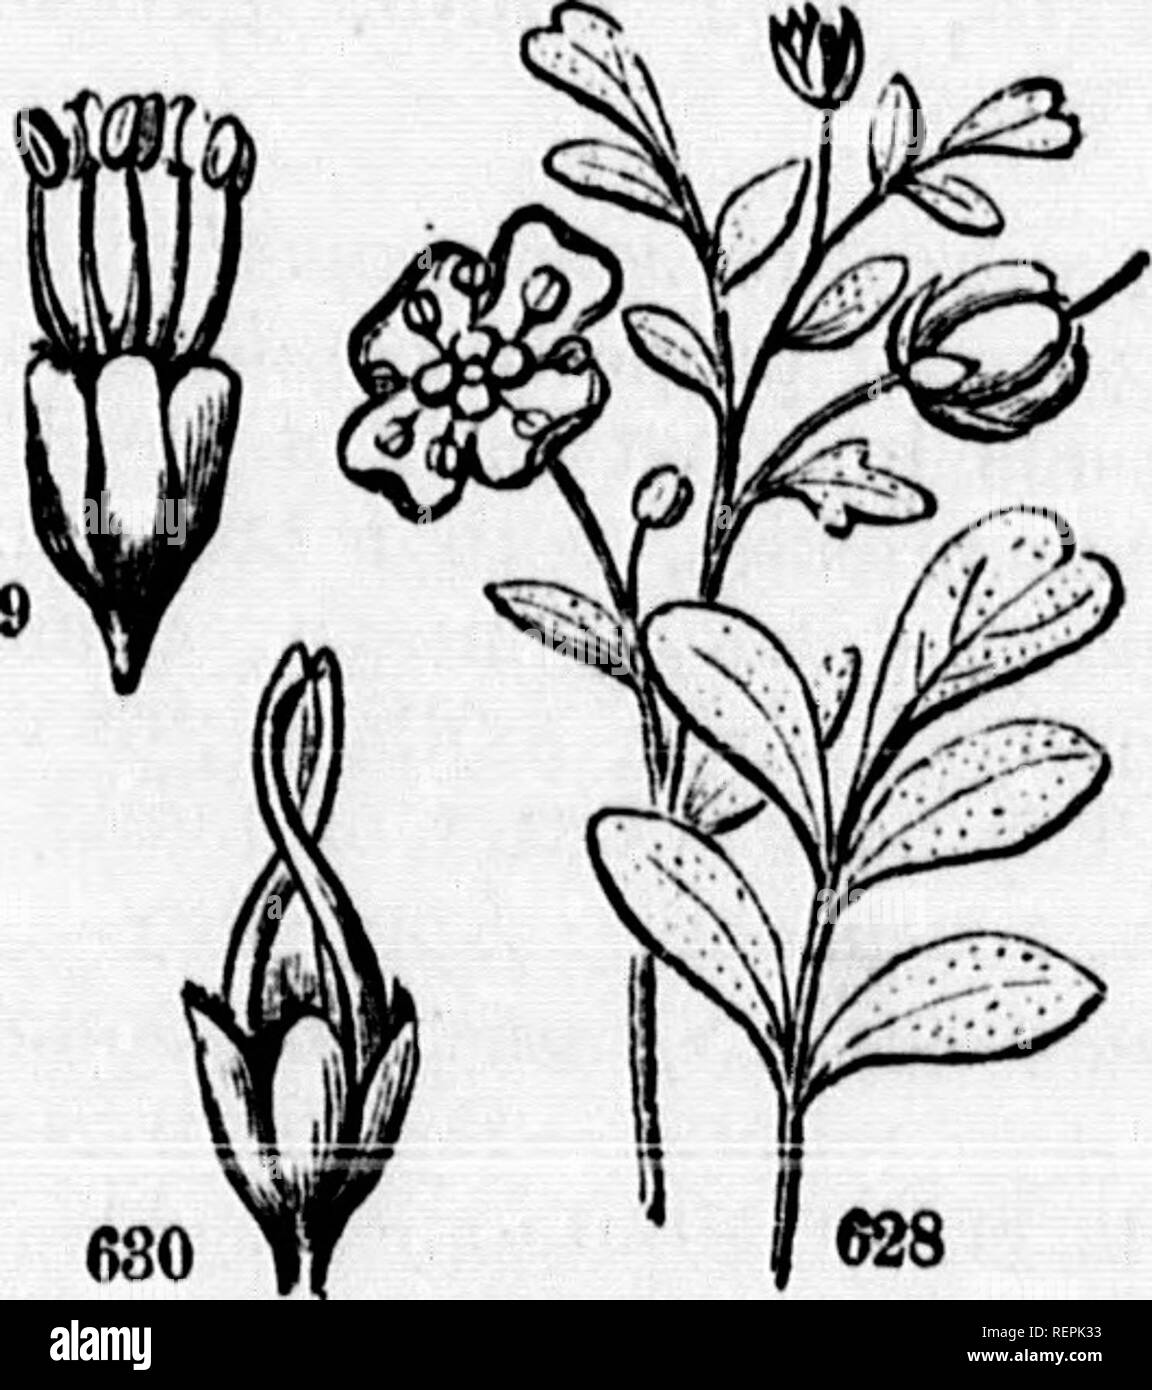 . Class-book of botany [microform] : being outlines of the structure, physiology, and classification of plants : with a flora of the United States and Canada. Botany; Botany; Plants; Plants; Botanique; Botanique; Plantes; Botanique. Obdhr 37.—RUTACEiE. 281 united, tho nppor oiio spurred. Petals 1—5, the throo lower ones Btalked, the 2 upper inserted on tin oalyx. Stamens 6 to 10, distinct, unequal, pcrigynoiia. Oranj 3-c'arpeled; style 1; stigmas 3. Fruit separating into 3 indeliisceut, l-seeded nuts. Sds. largo. Albumen 0. Ganerti 4, speciei 4{ natives of S. Amerloa. Thoy possess tho same nn Stock Photo